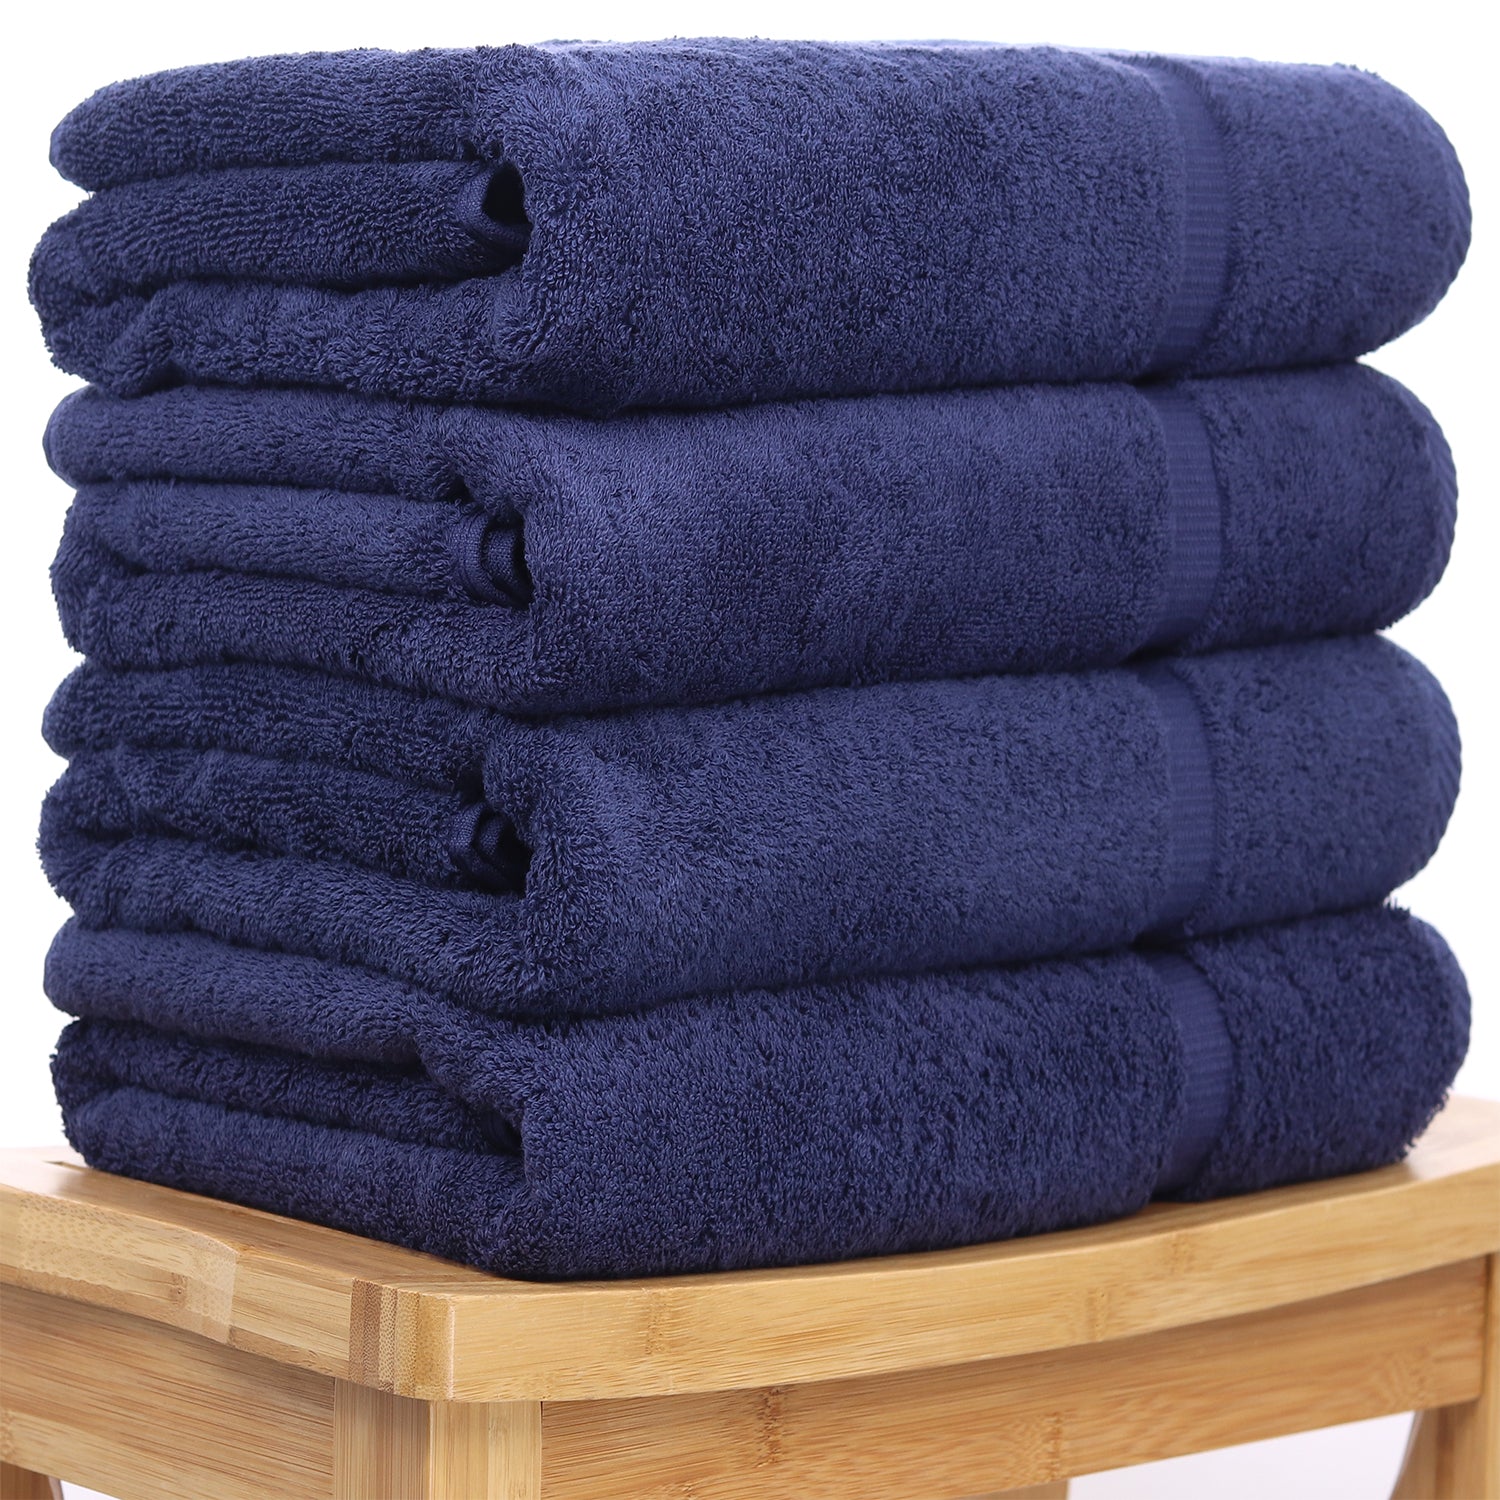 12 Pack Luxury Hotel Bath Towels 27x52 High Quality Soft Ring Spun Cotton  14 Lbs with Designer Dobby Border